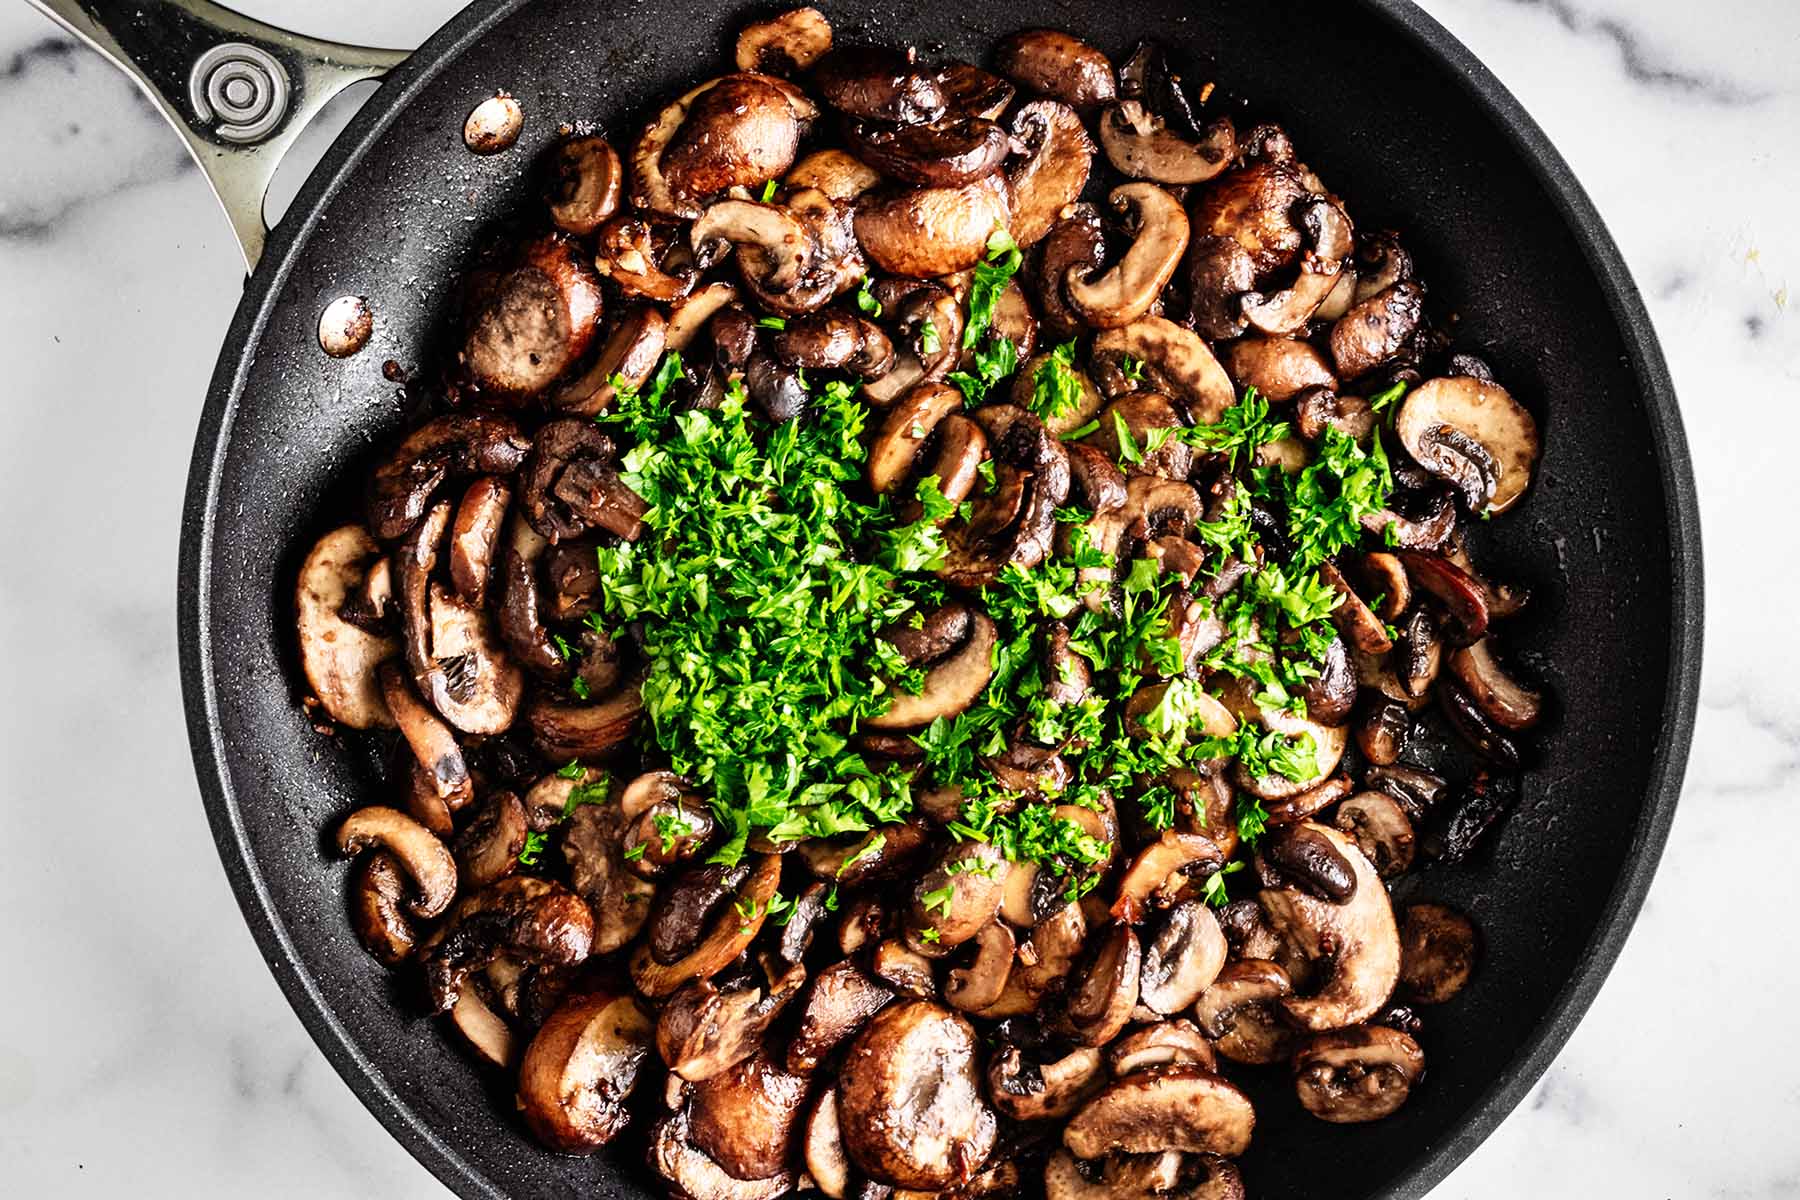 Closeup of chopped parsley added to skillet with sautéed mushrooms.